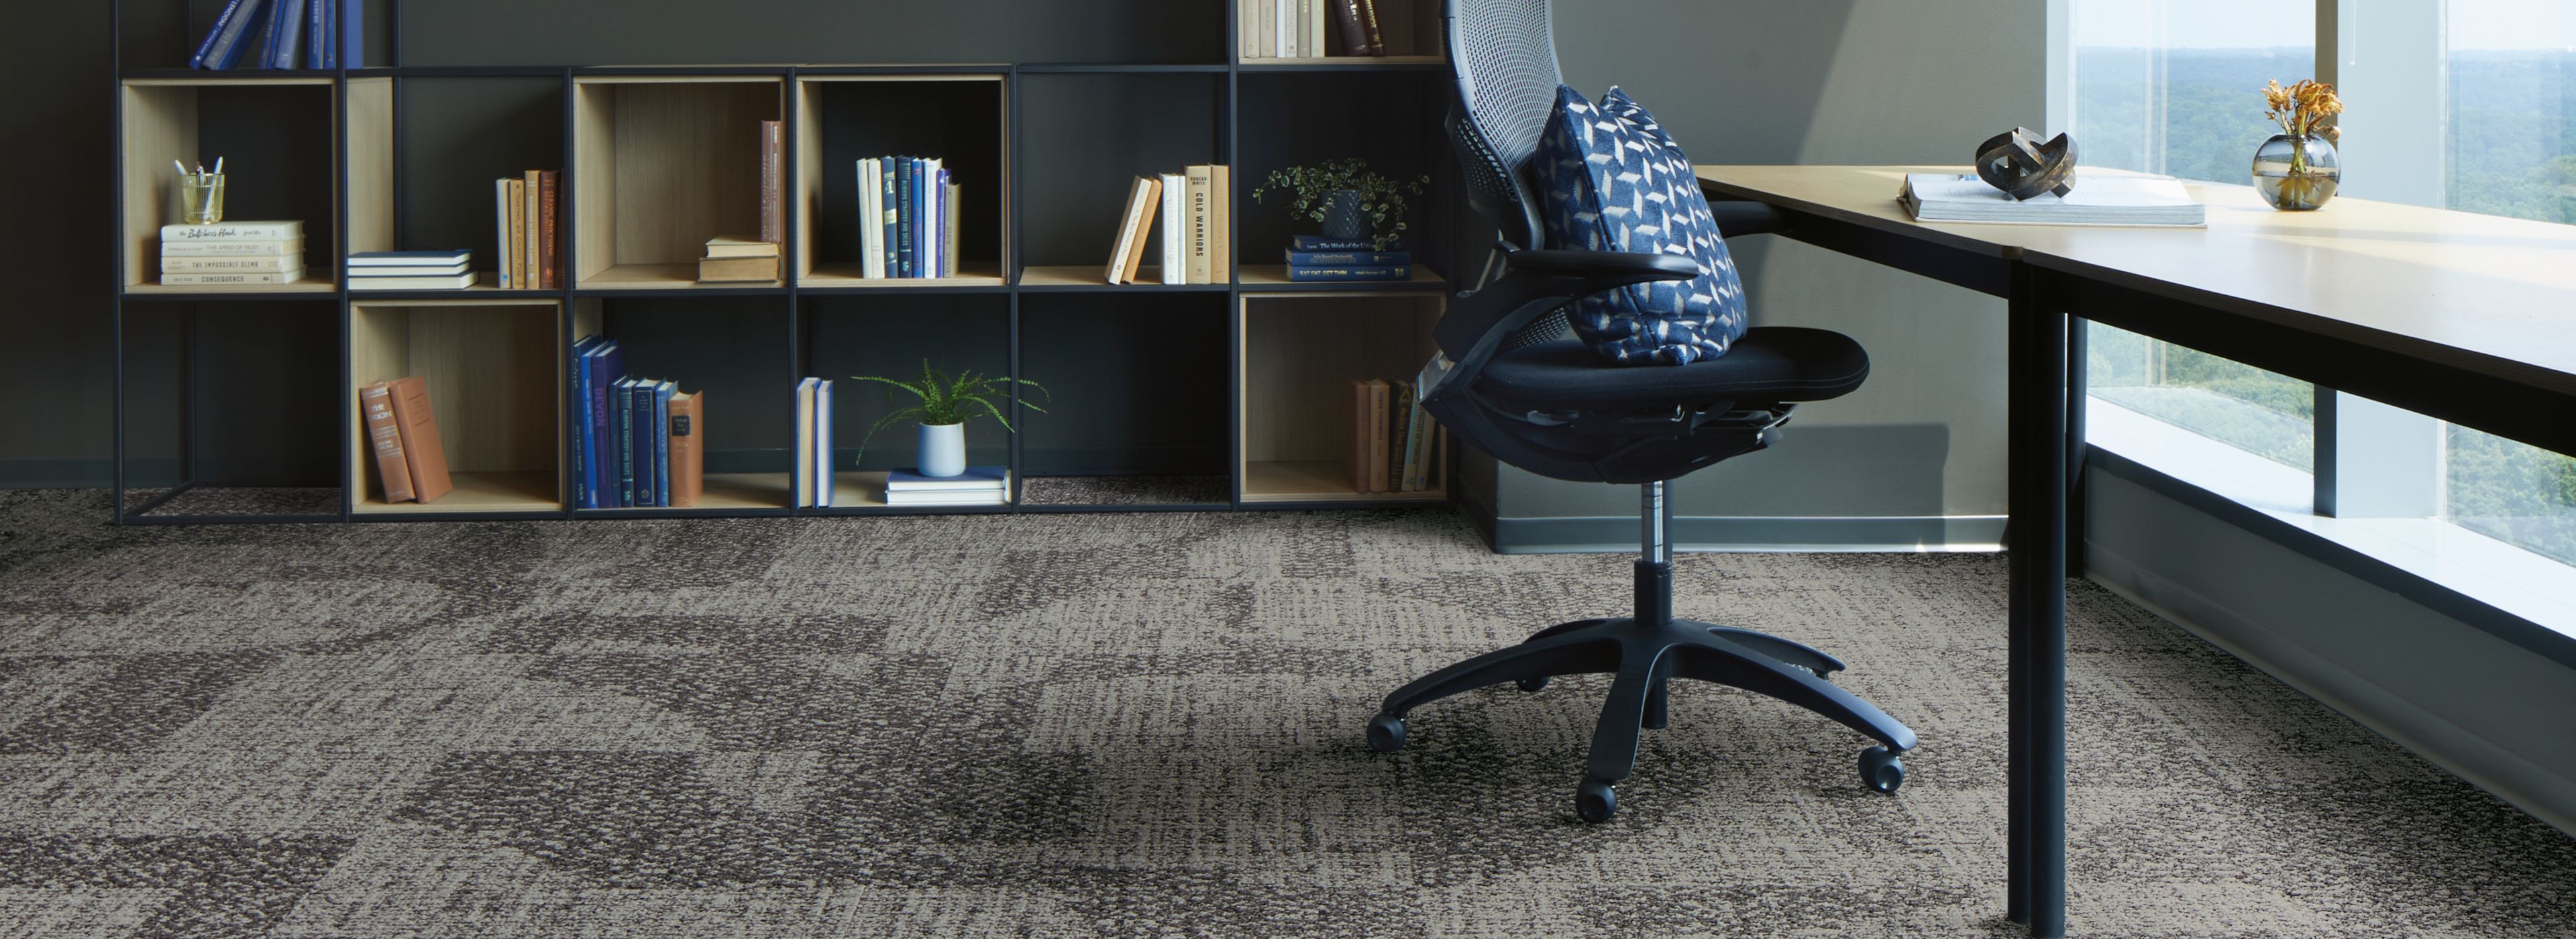 Interface Third Space 302 carpet tile in private office imagen número 1